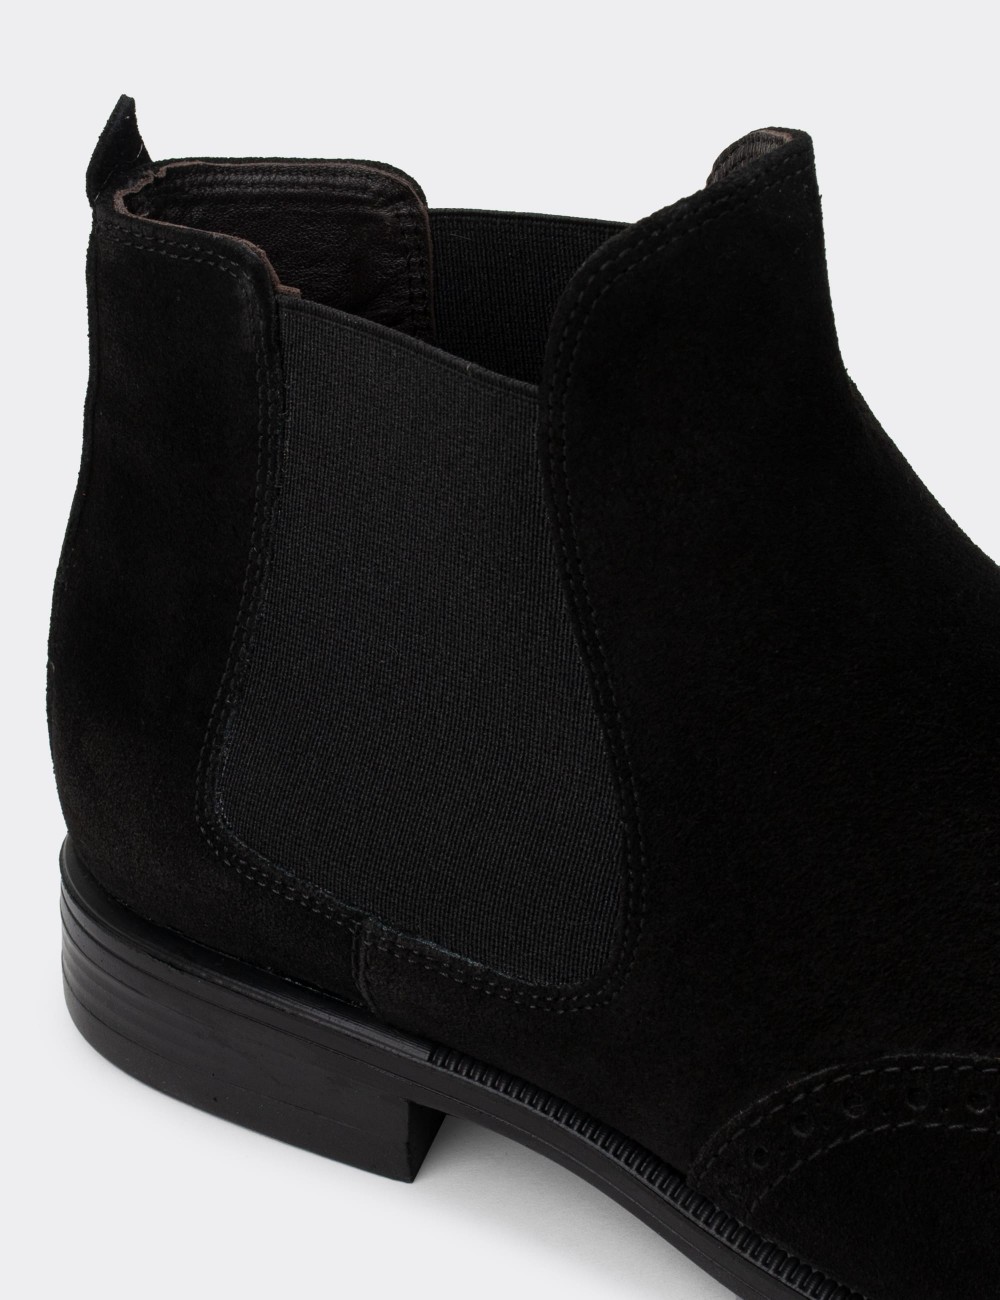 Black Suede Leather Chelsea Boots - 01622MSYHC12